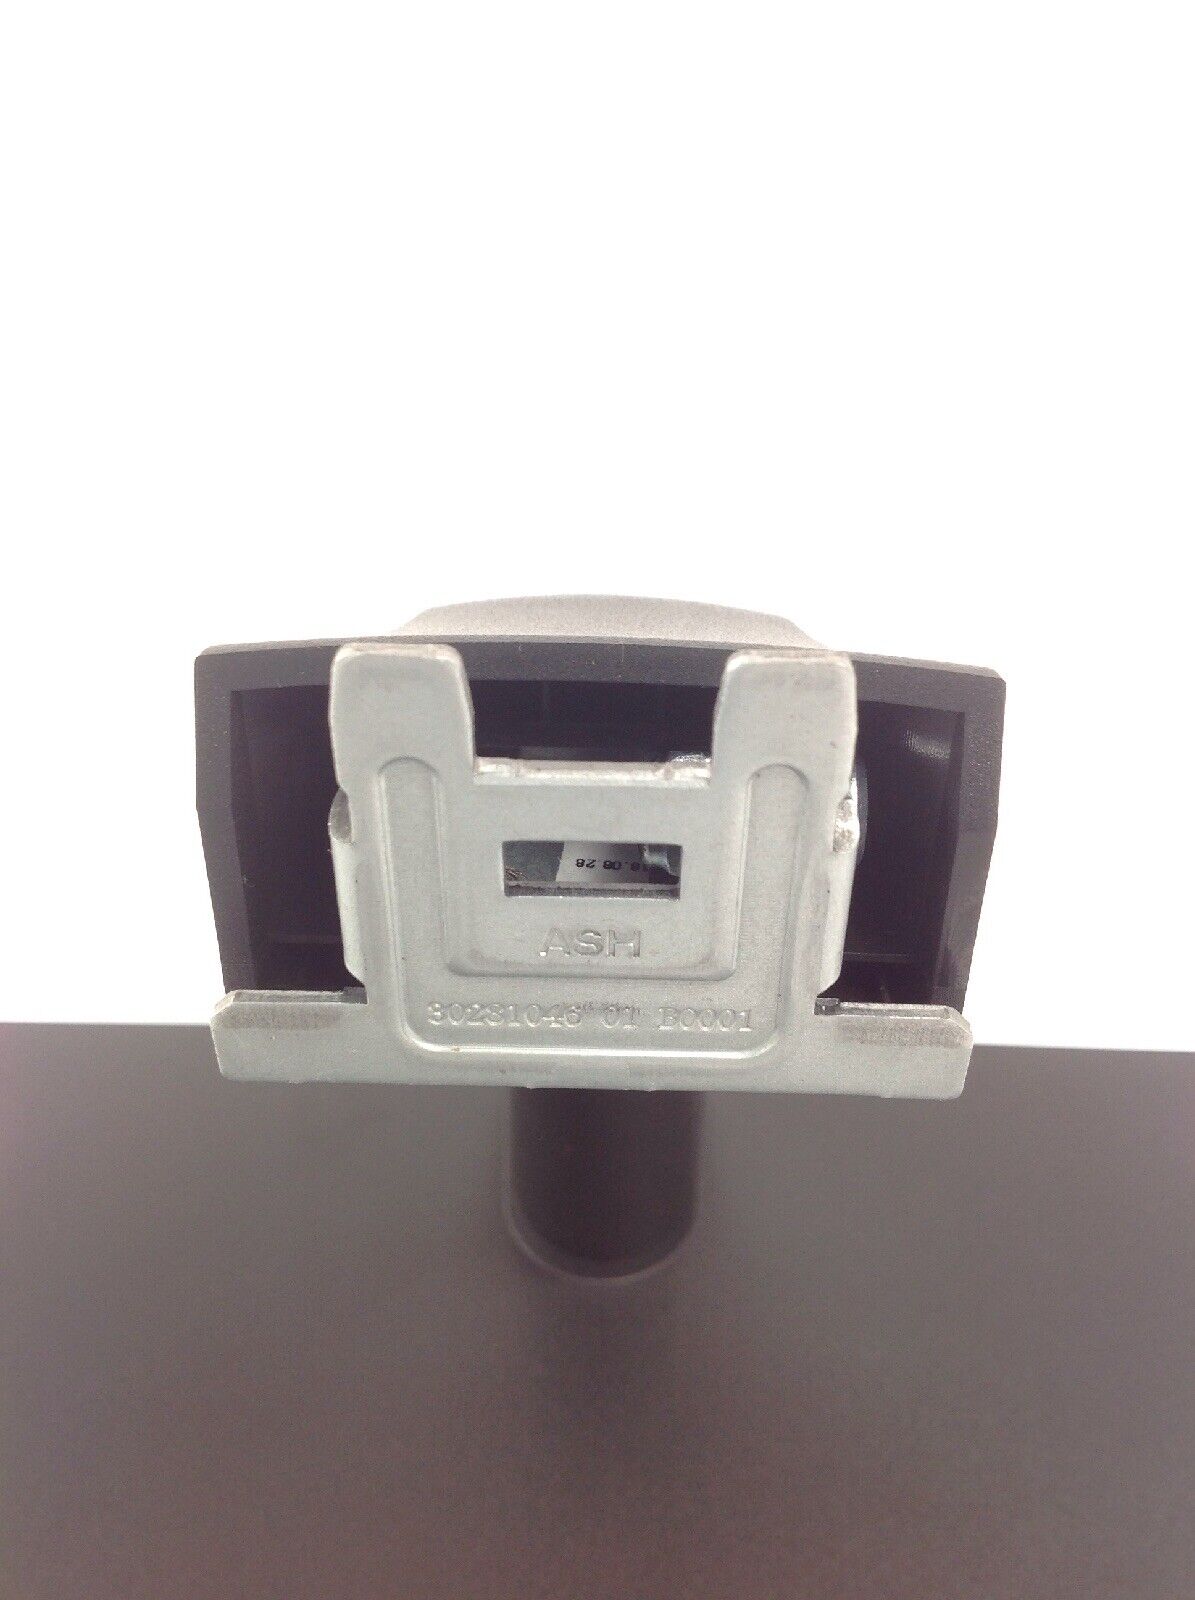 Ash Monitor Stand 30281046 Black with Base 30280082